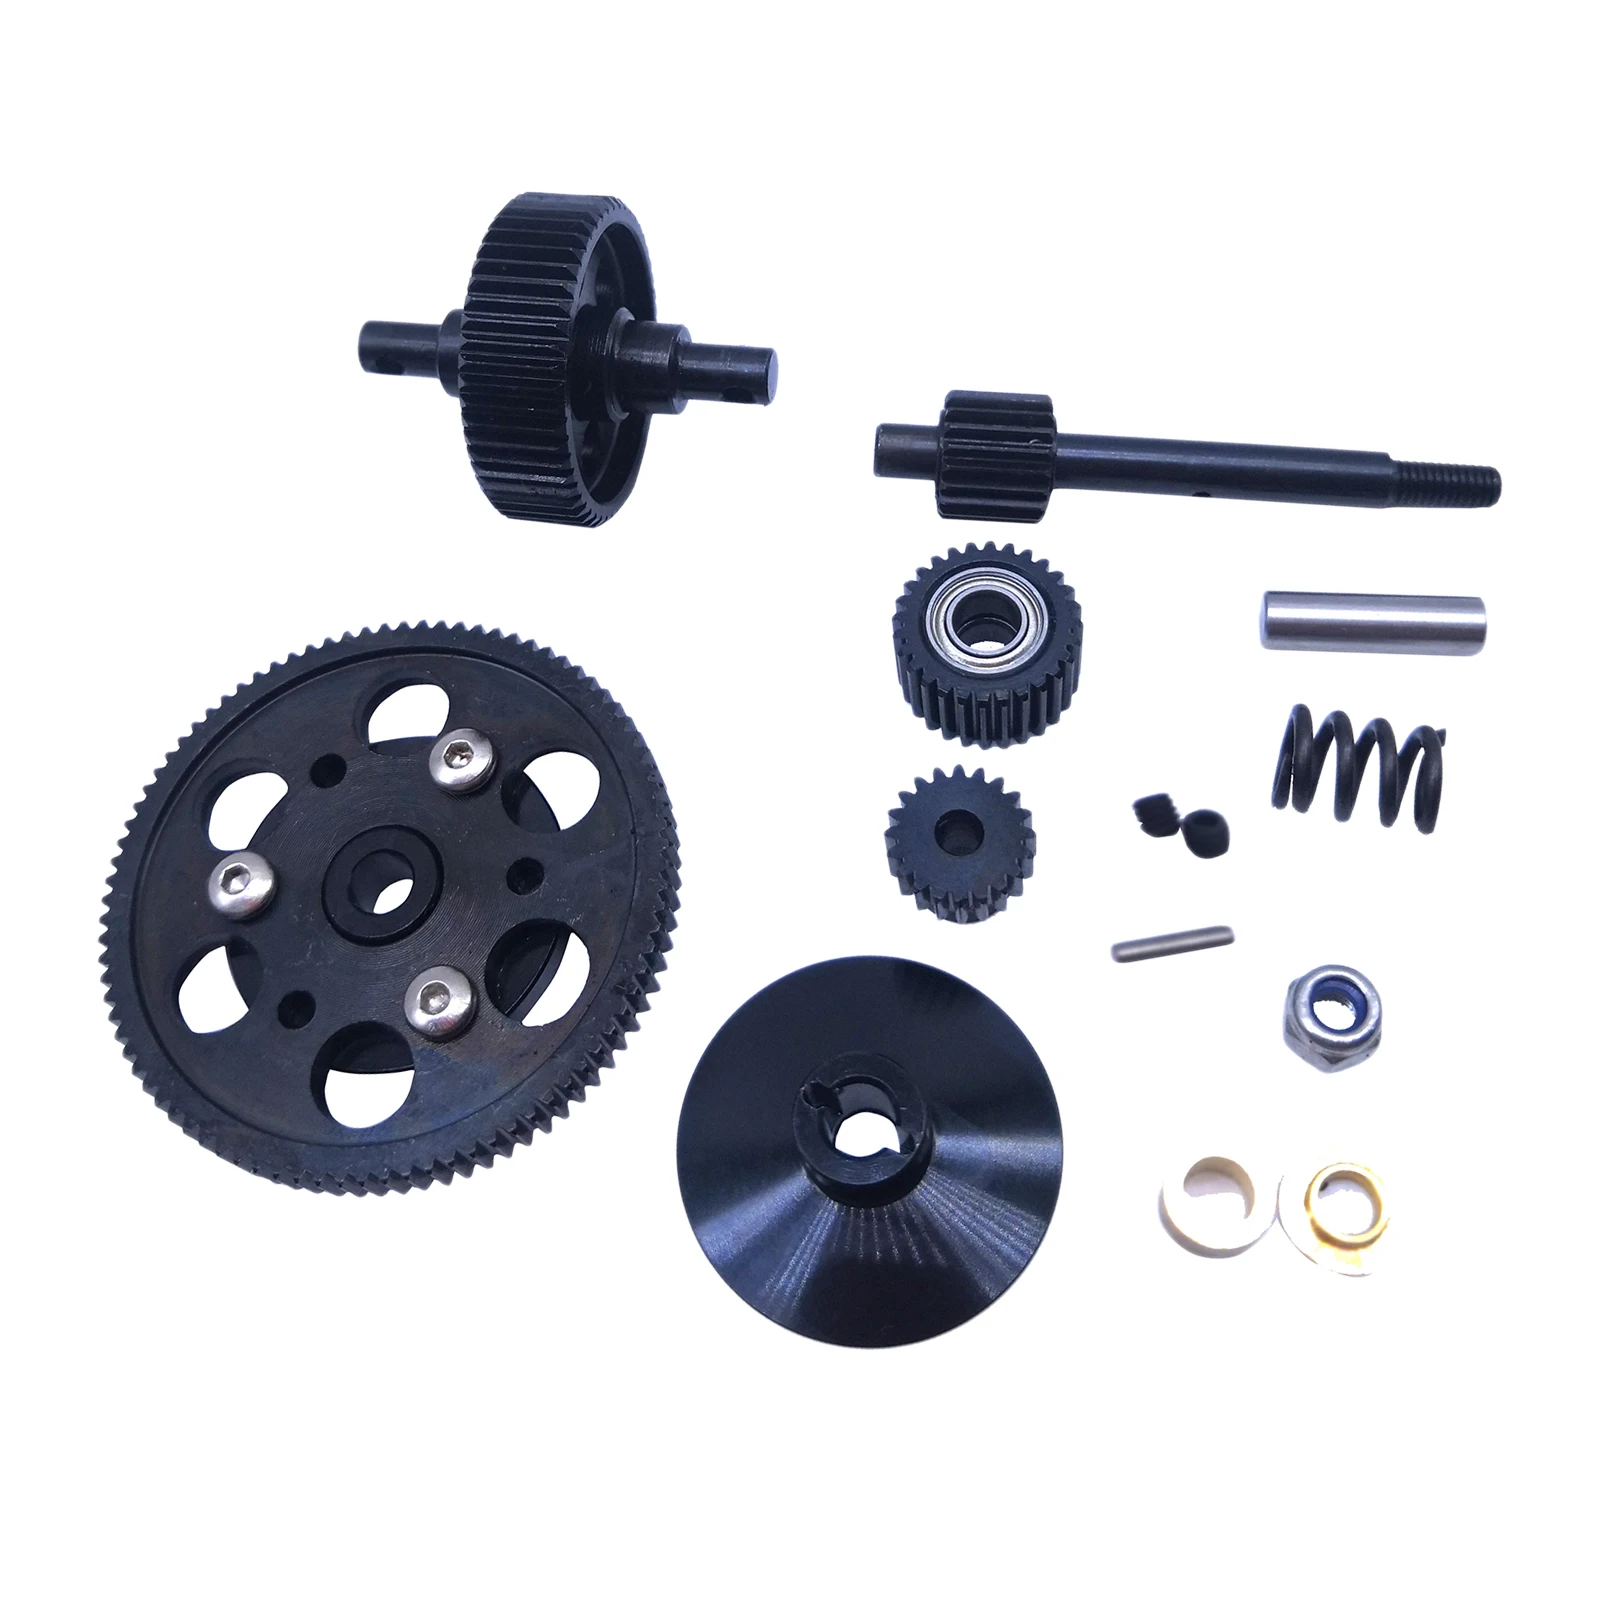 Complete Super beauty product restock Super sale quality top Set Hardened Steel Transmission With Gear B Motor Gears